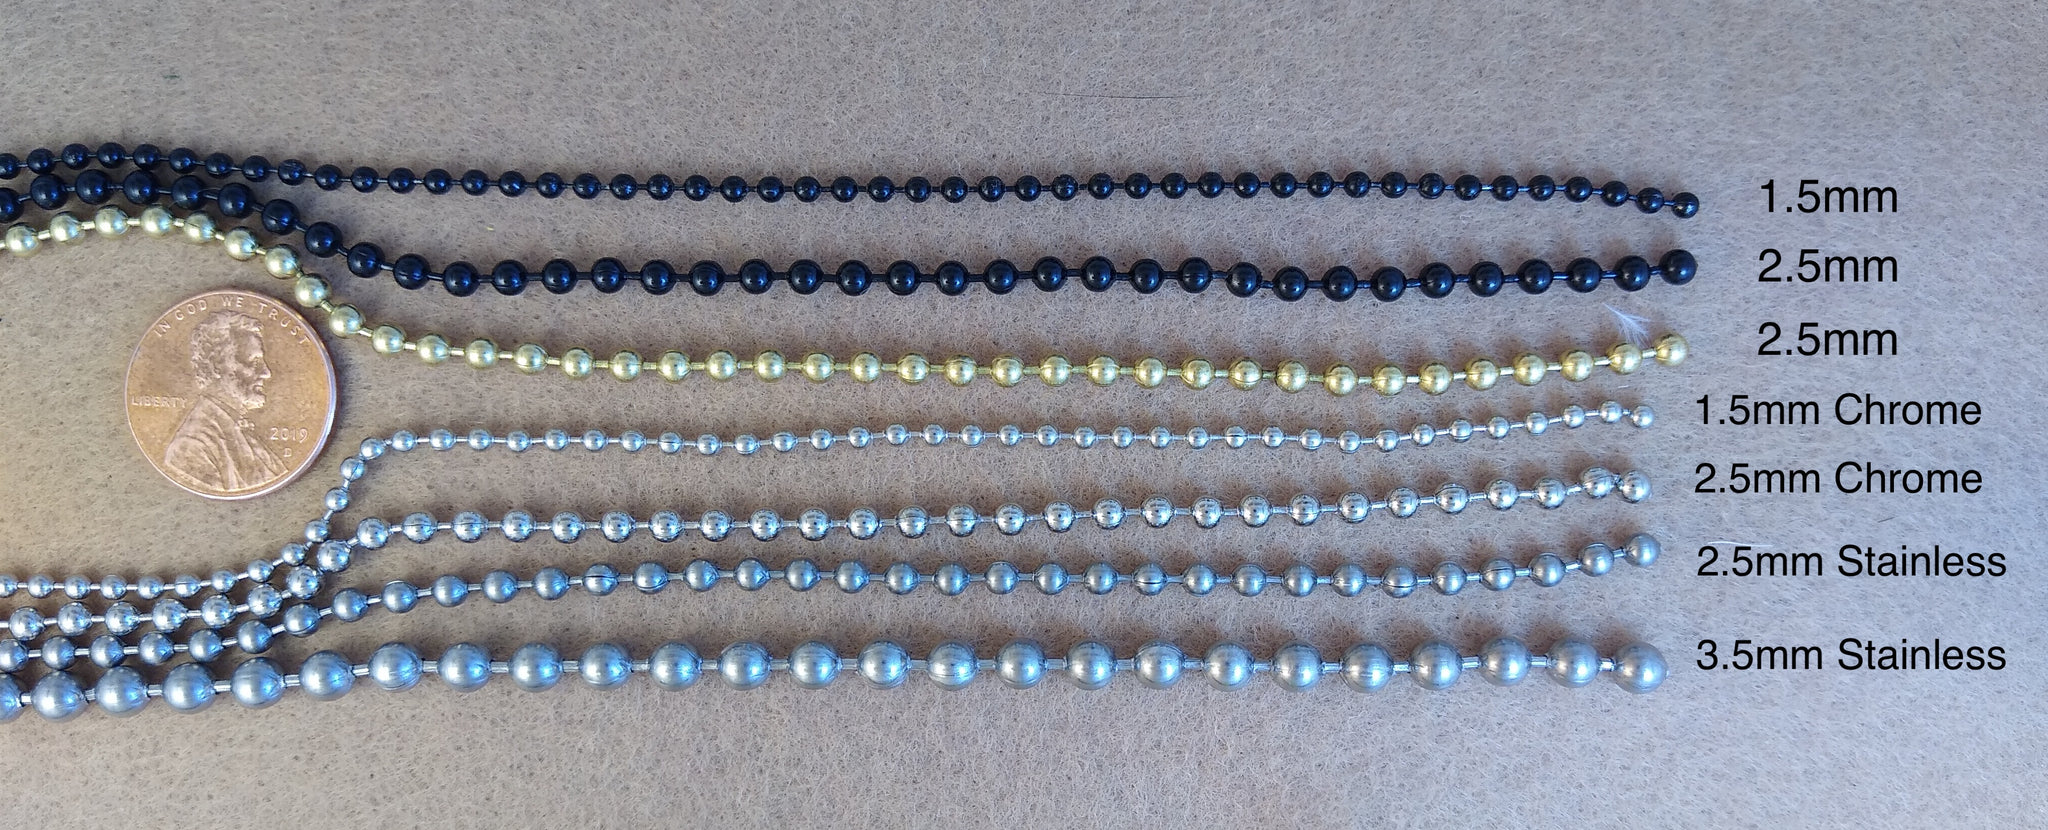 Bead Chain Eyes, $1.50 for most